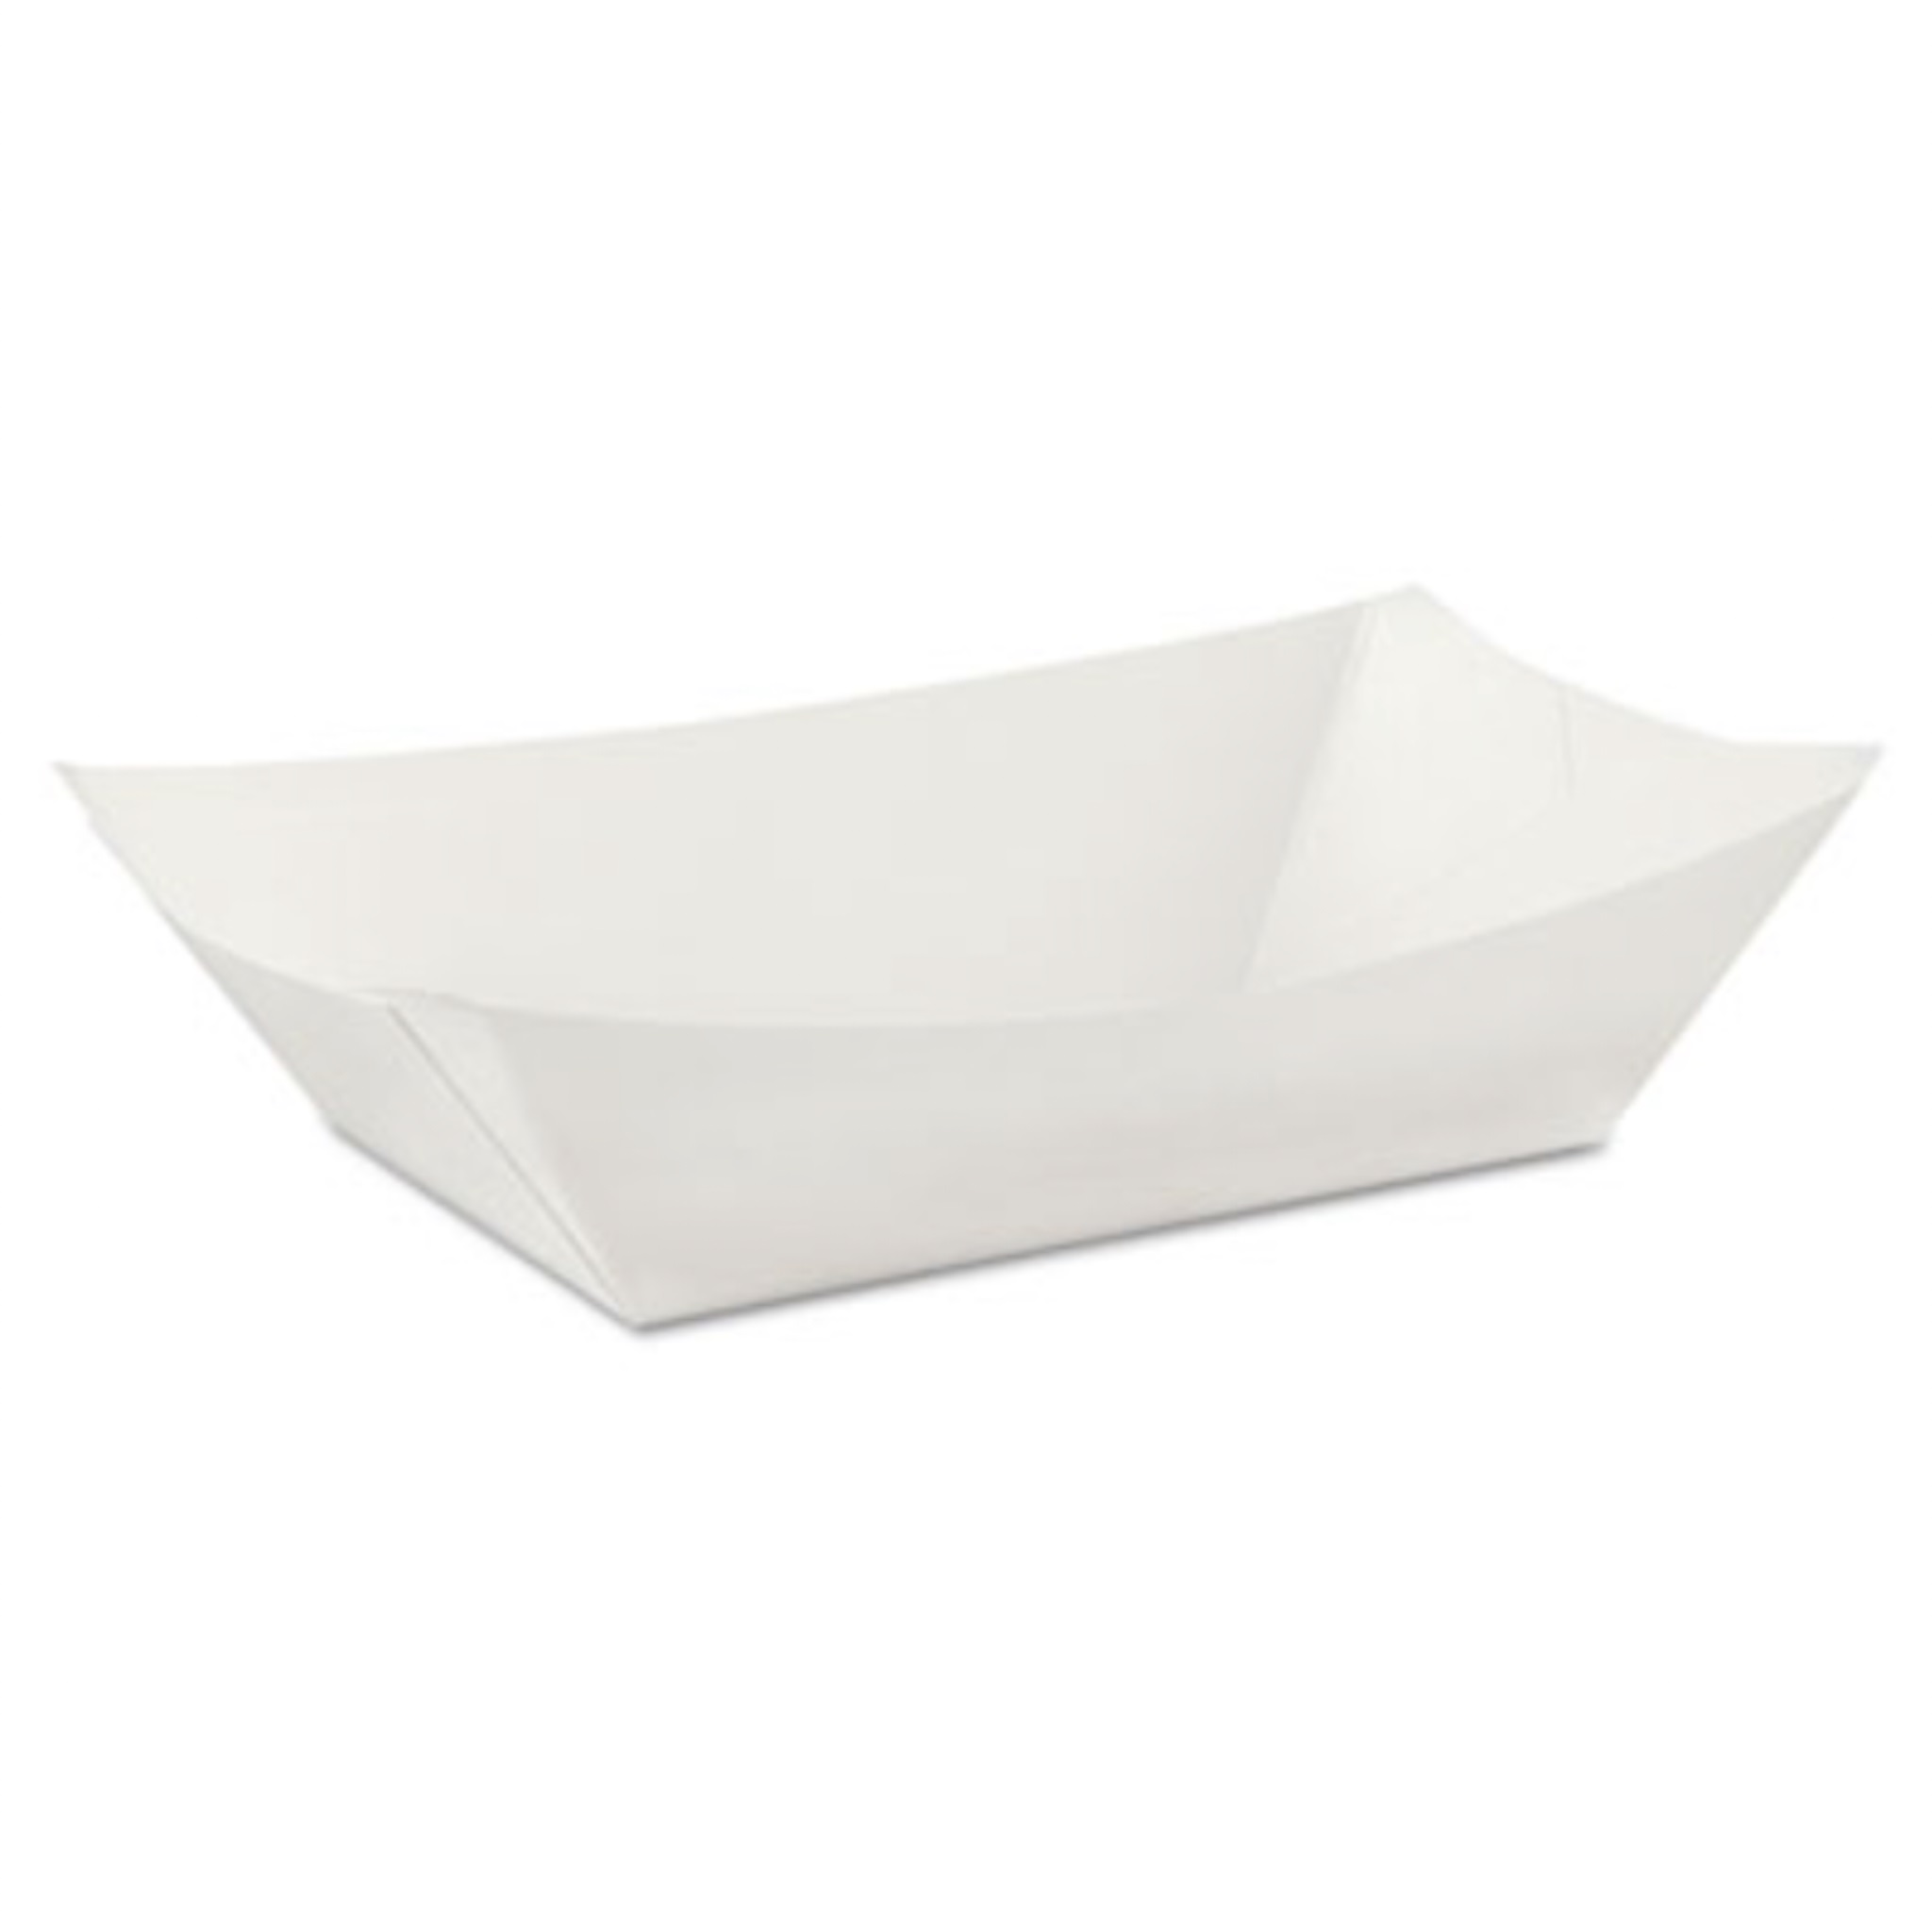 Food Tray 3lb White Color 500ct - Sold by PACK